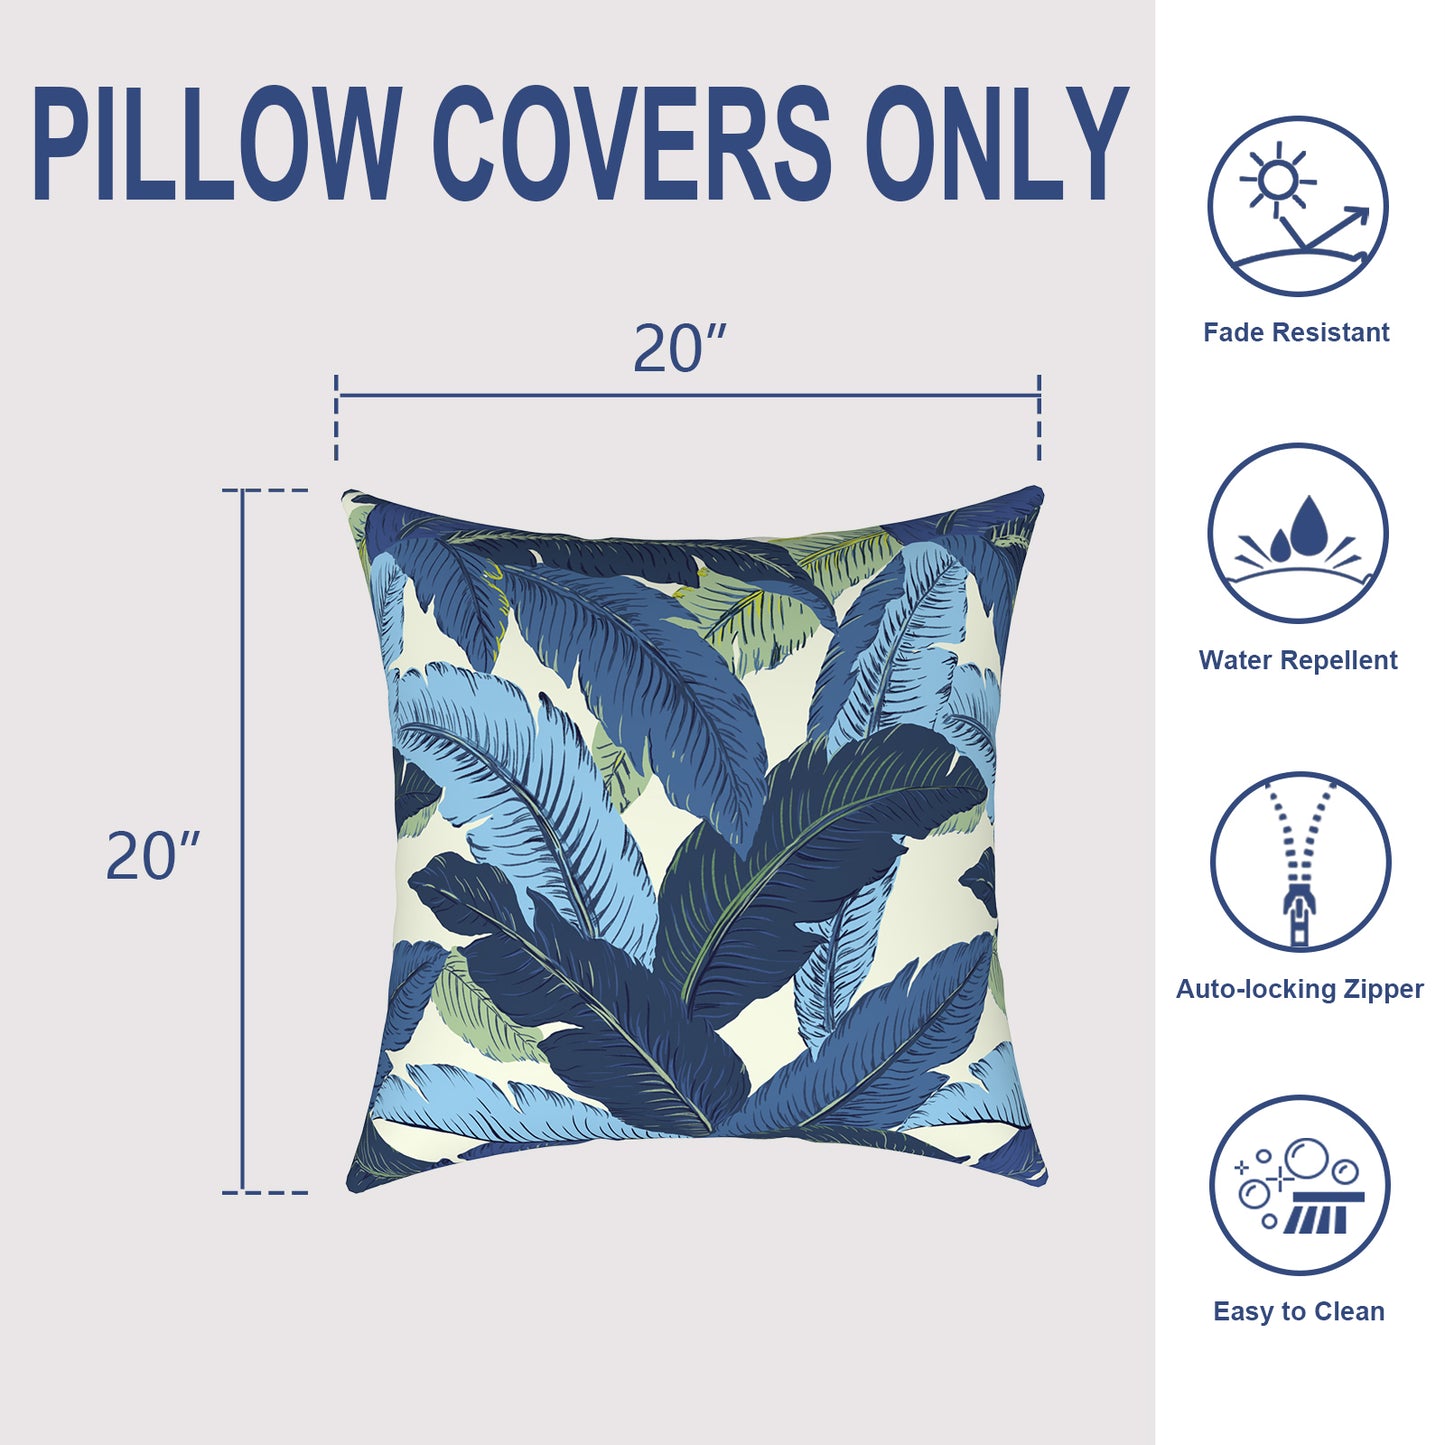 Melody Elephant Pack of 2 Patio Throw Pillow Covers ONLY, Water Repellent Cushion Cases 20x20 Inch, Square Pillowcases for Outdoor Couch Decoration, Swaying Palms Blue